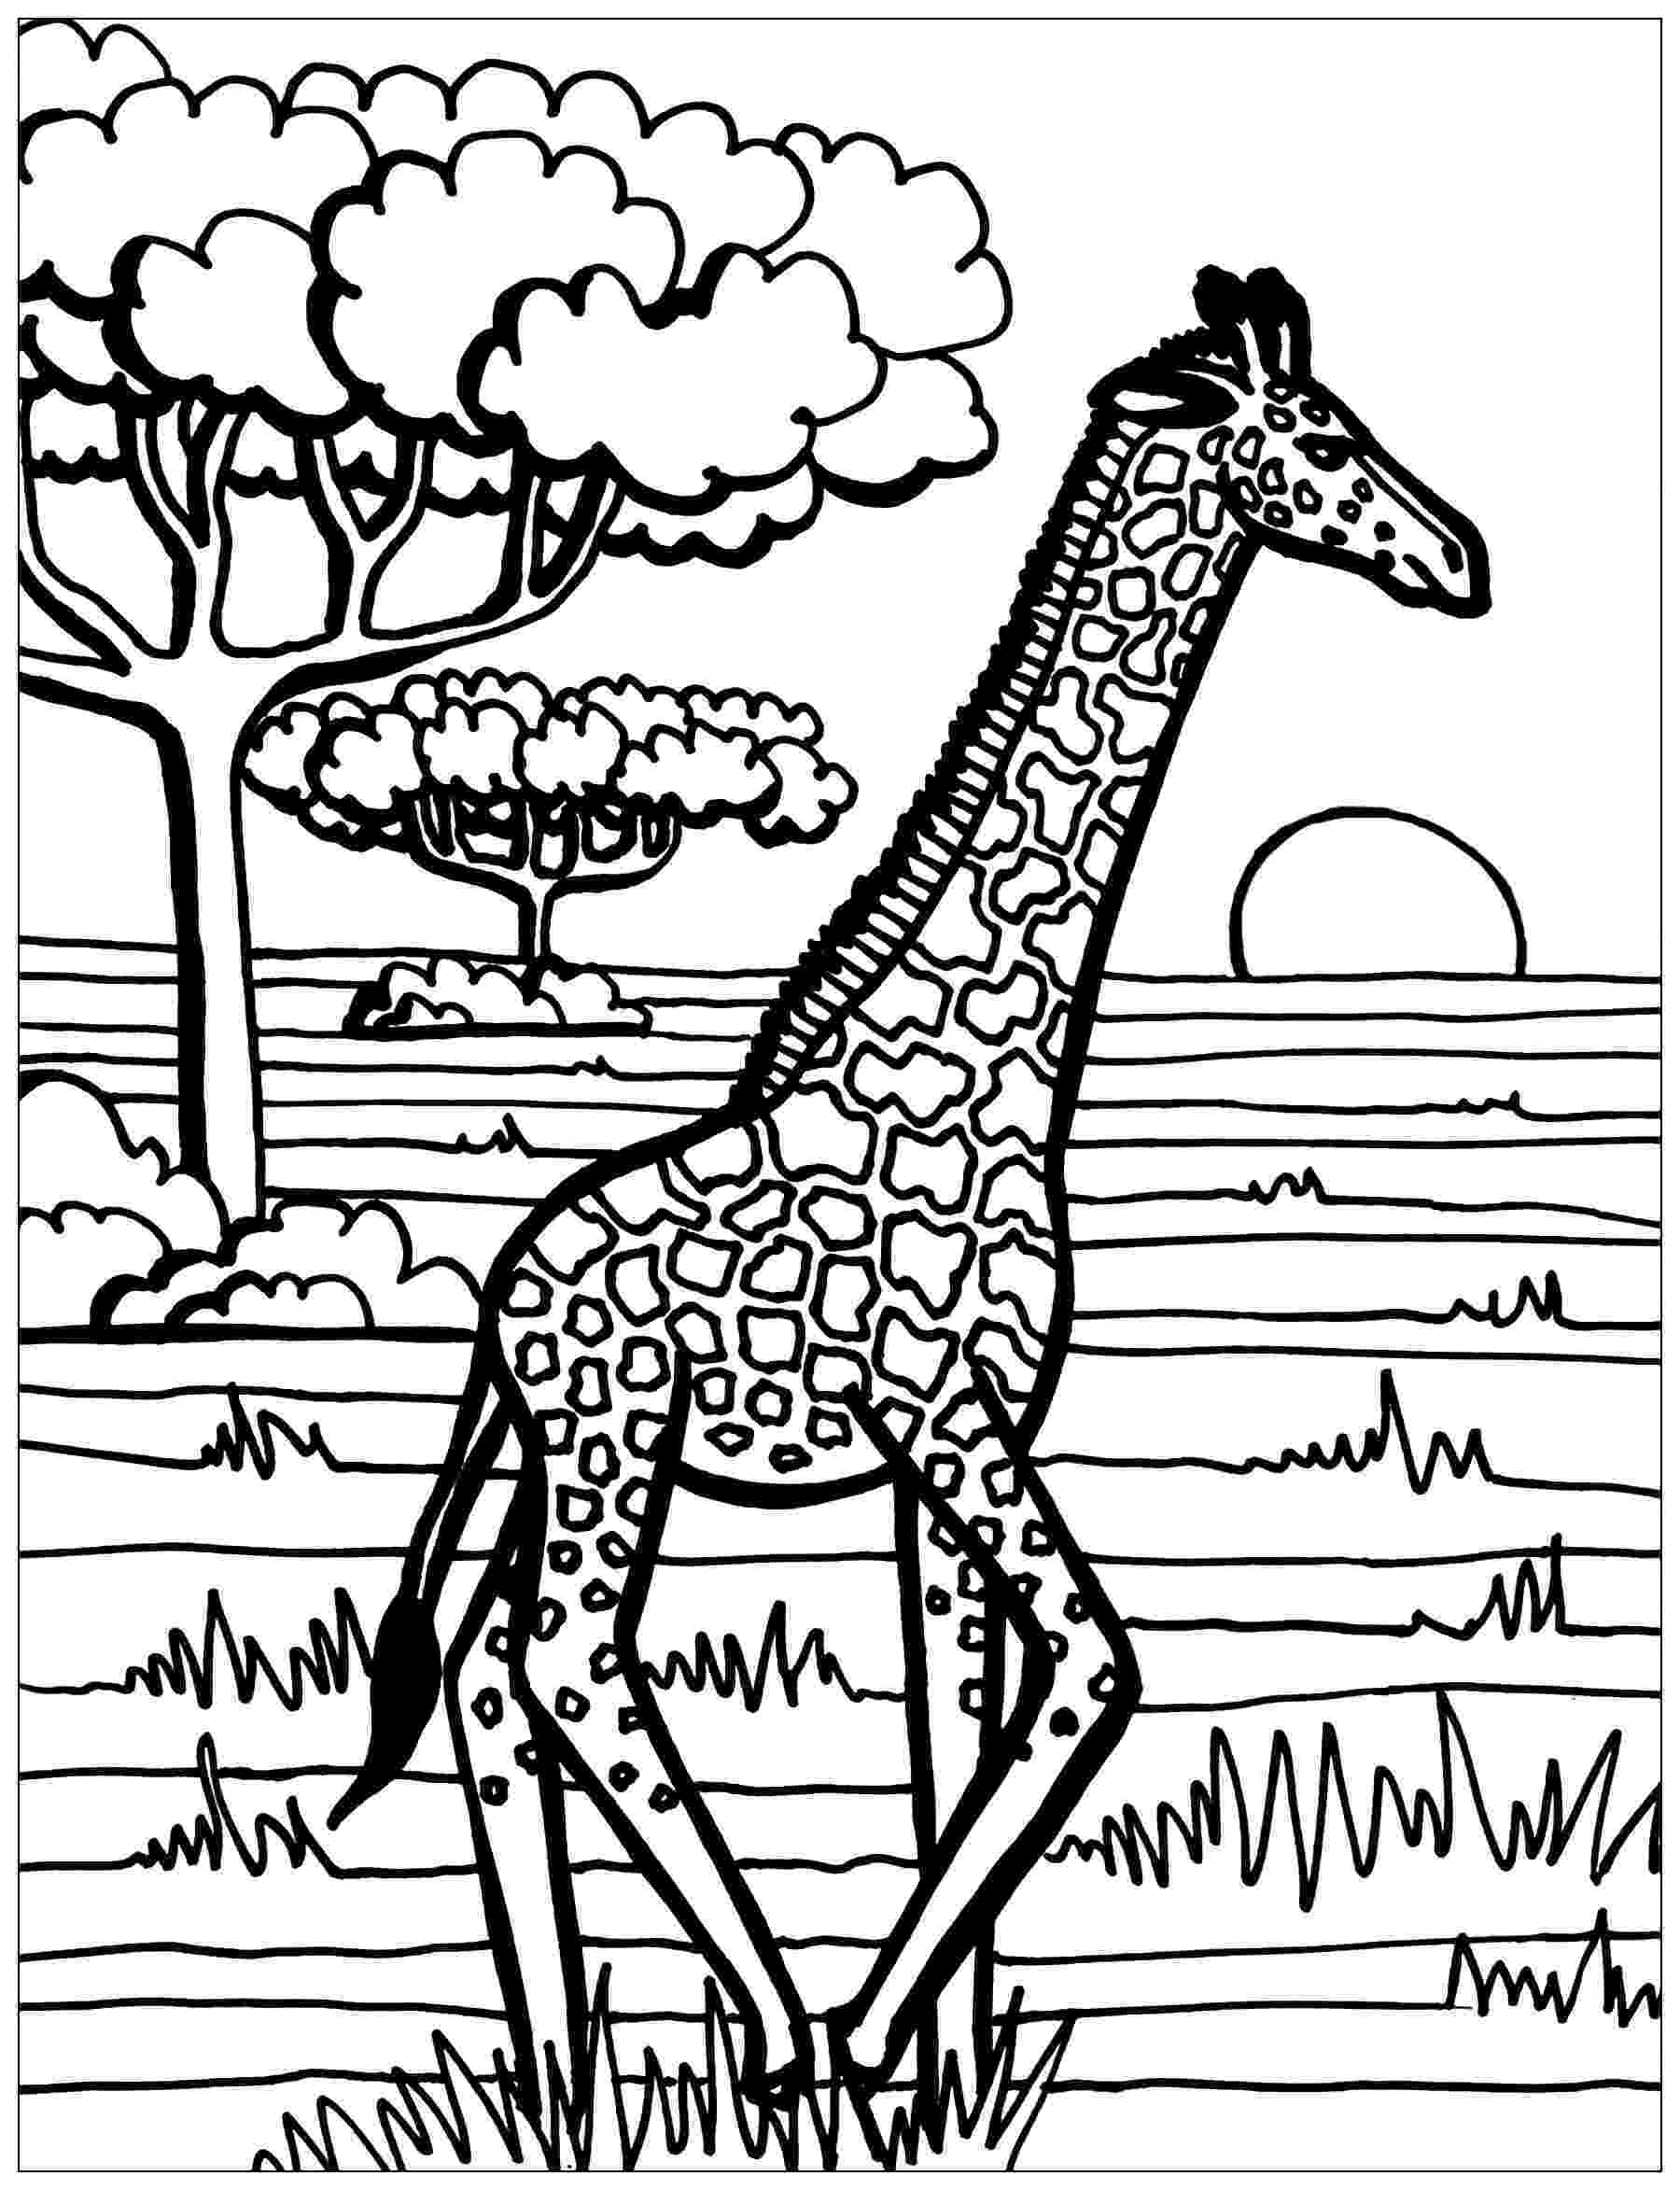 colouring sheet giraffe 17 best coloring pages images on pinterest coloring colouring sheet giraffe 